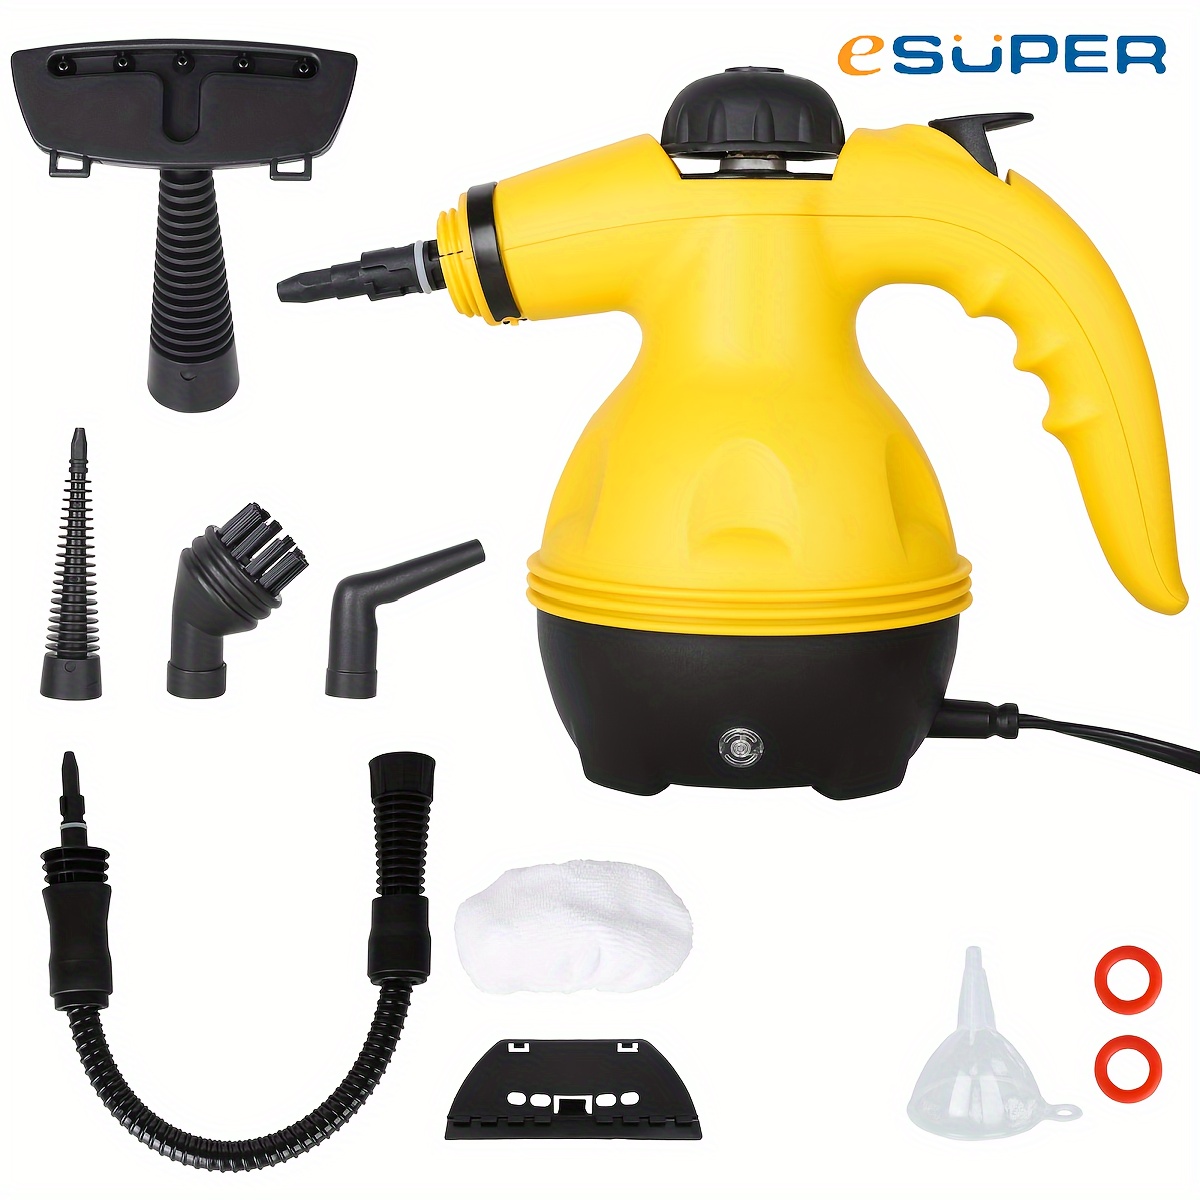 For Karcher SC1/SC2/SC3/SC4/SC5 Steam Cleaner Machine Spare Parts 1Pc Red  Powerful Sprinkler Nozzle Head Replace Accessories